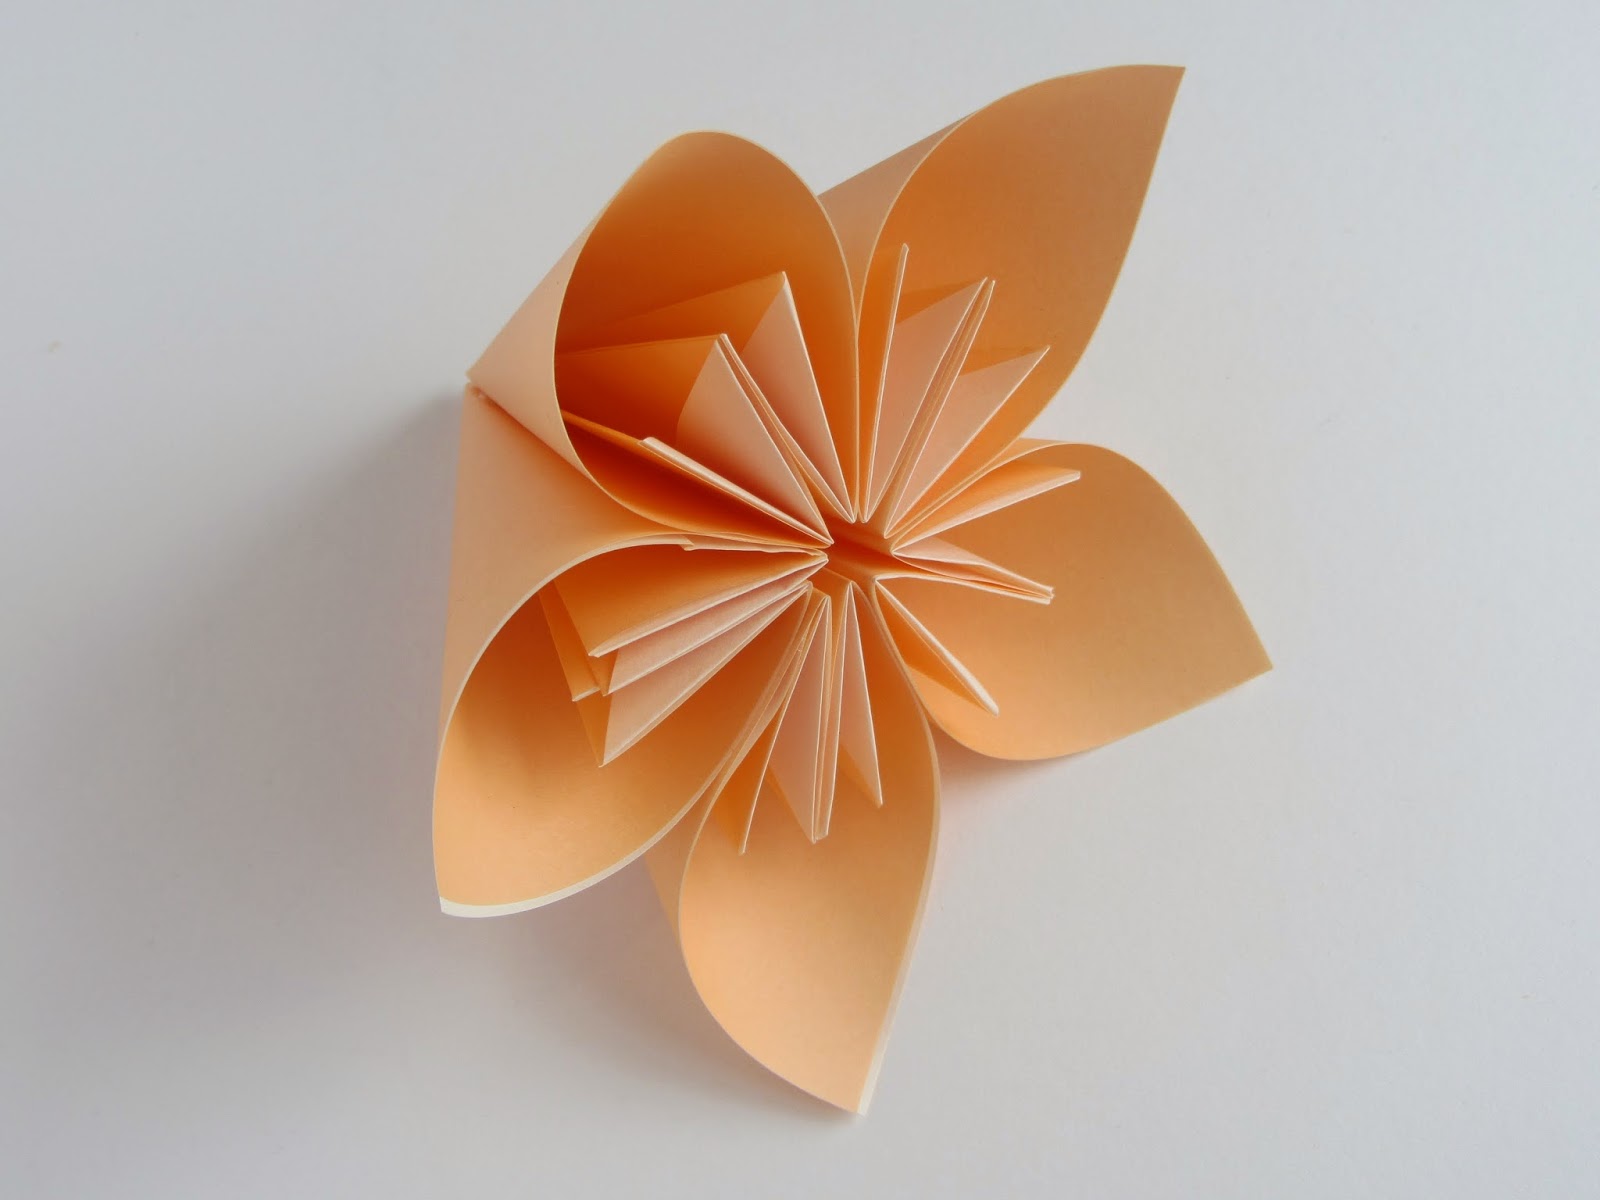 easy origami paper crafts: origami kusudama flower without glue